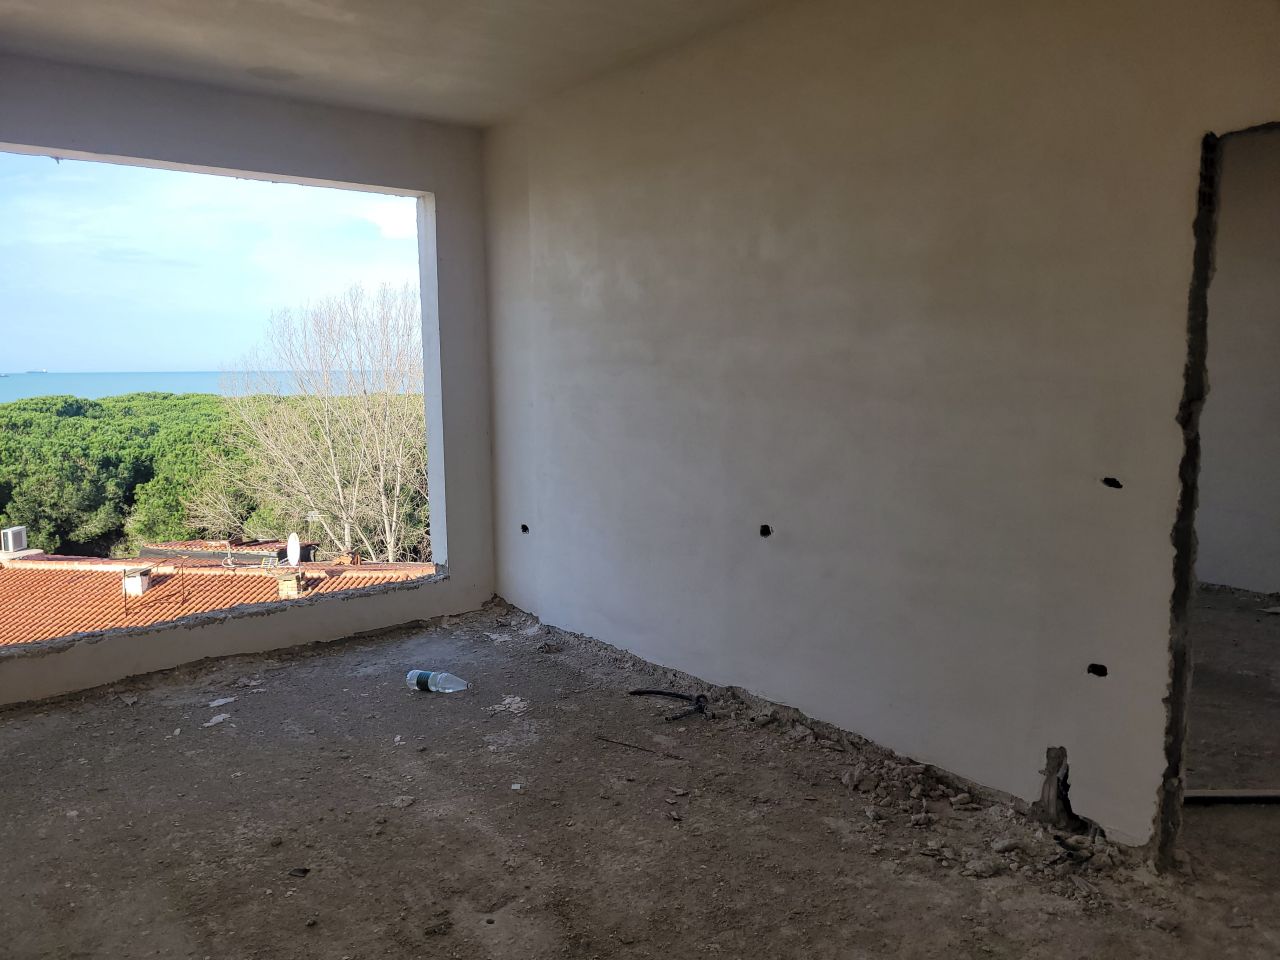 New Property For Sale In The Albanian Coastline Golem Durres Albania New Residence A Few Meters Away From The Sea